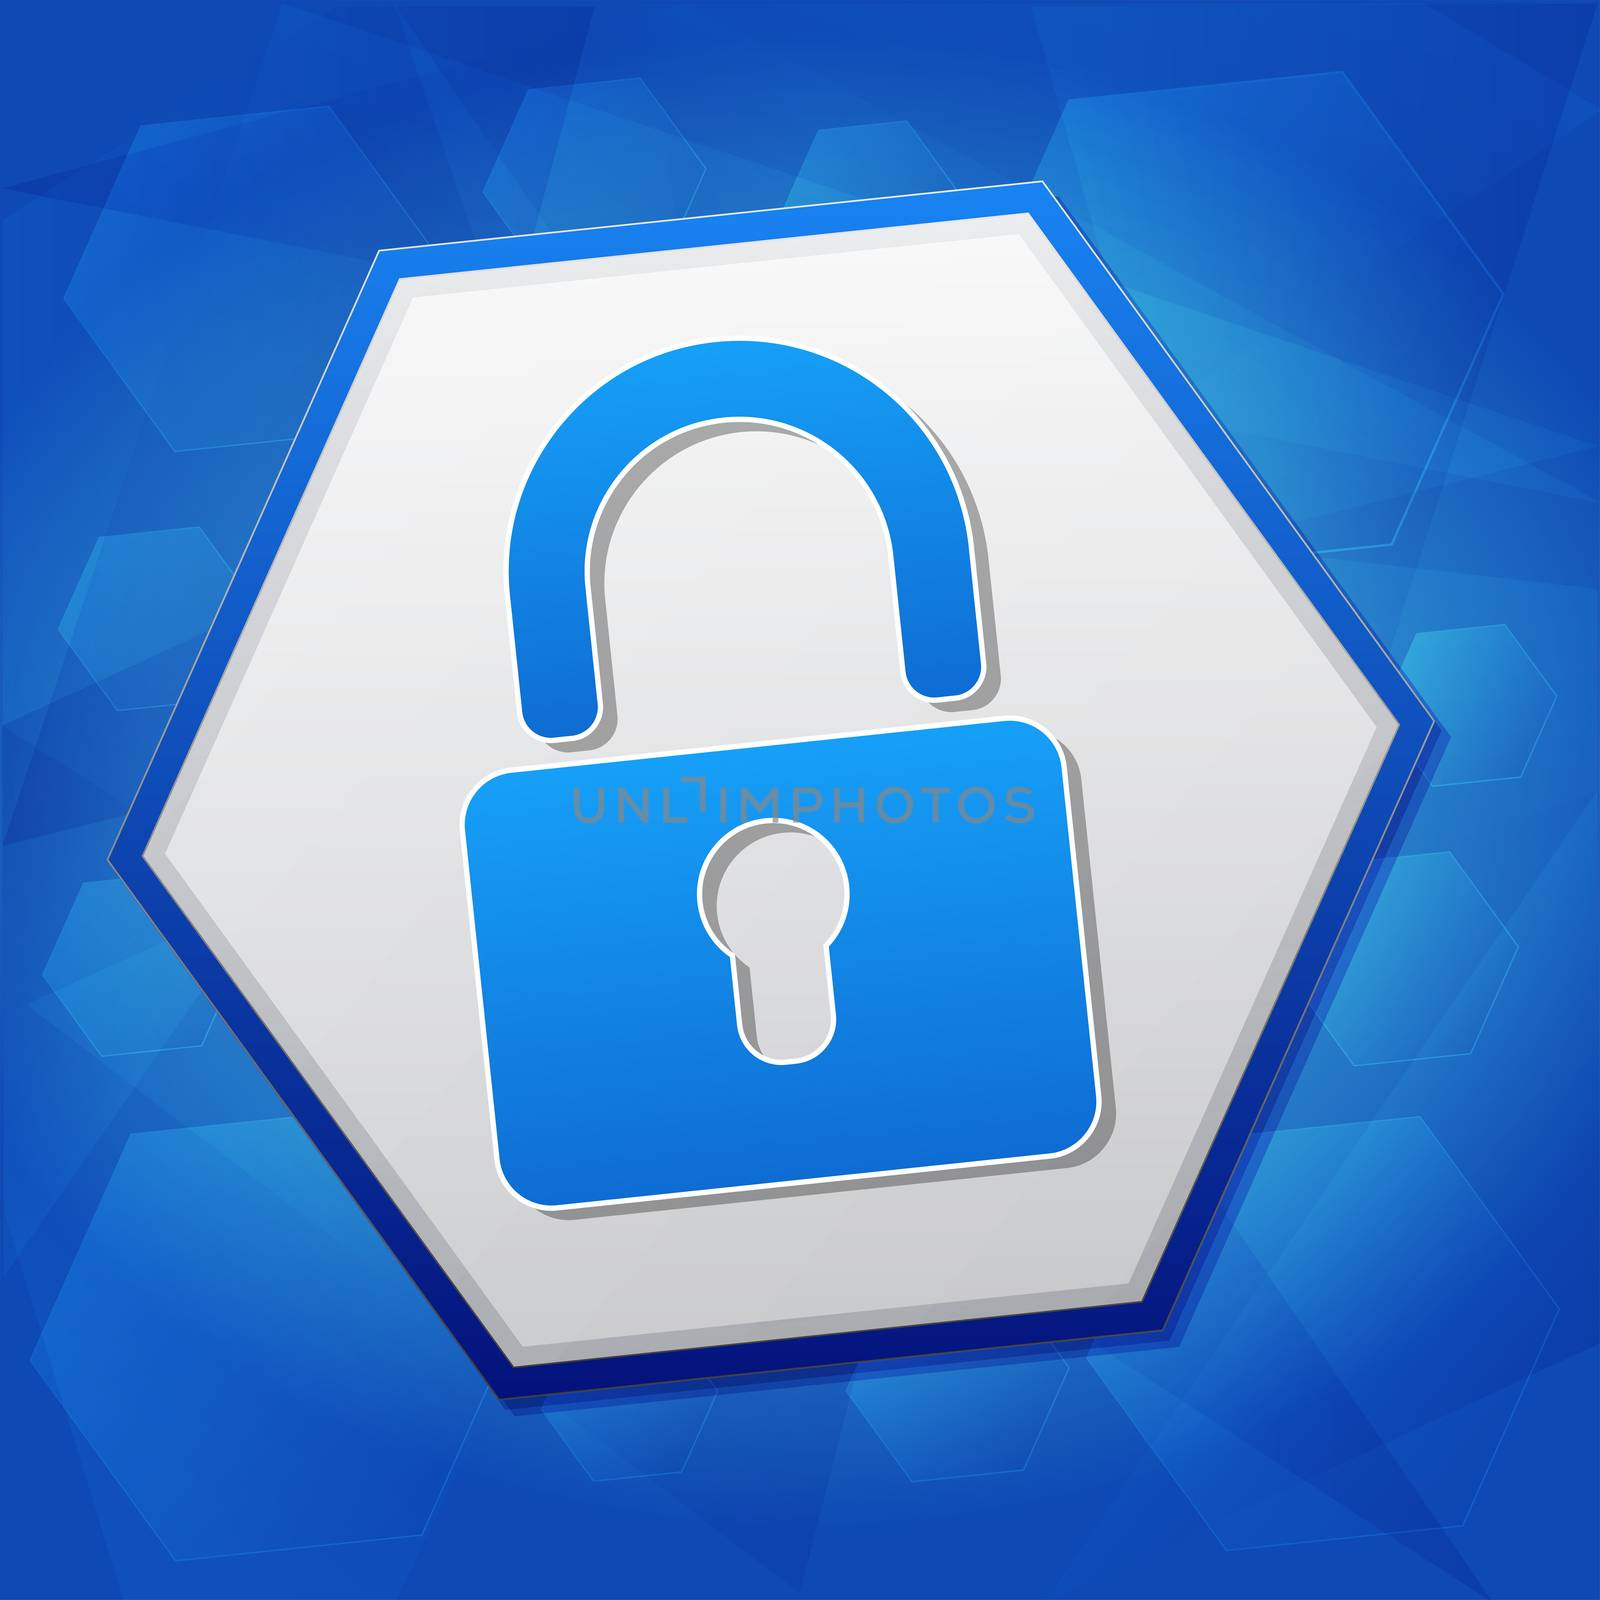 padlock sign over blue background with flat design hexagons, technical security concept symbol